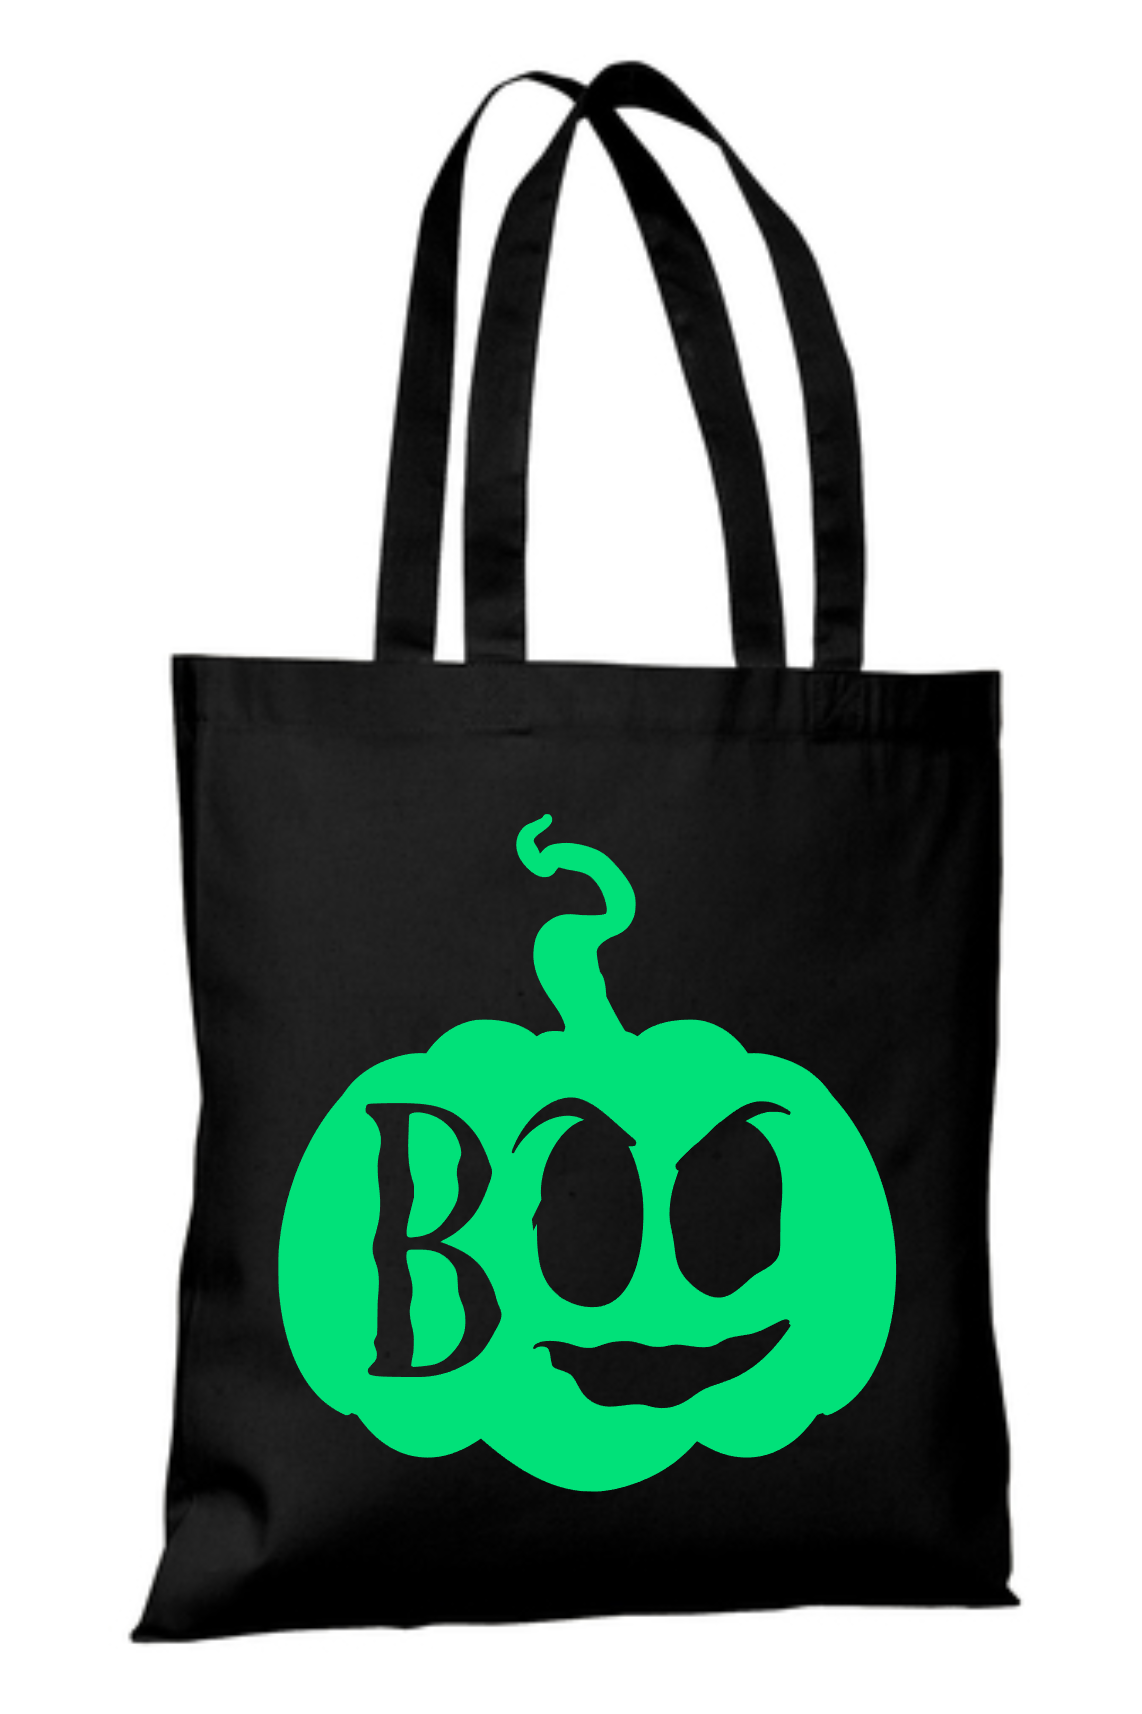 Glow in the Dark trick-or-treat bag for Halloween